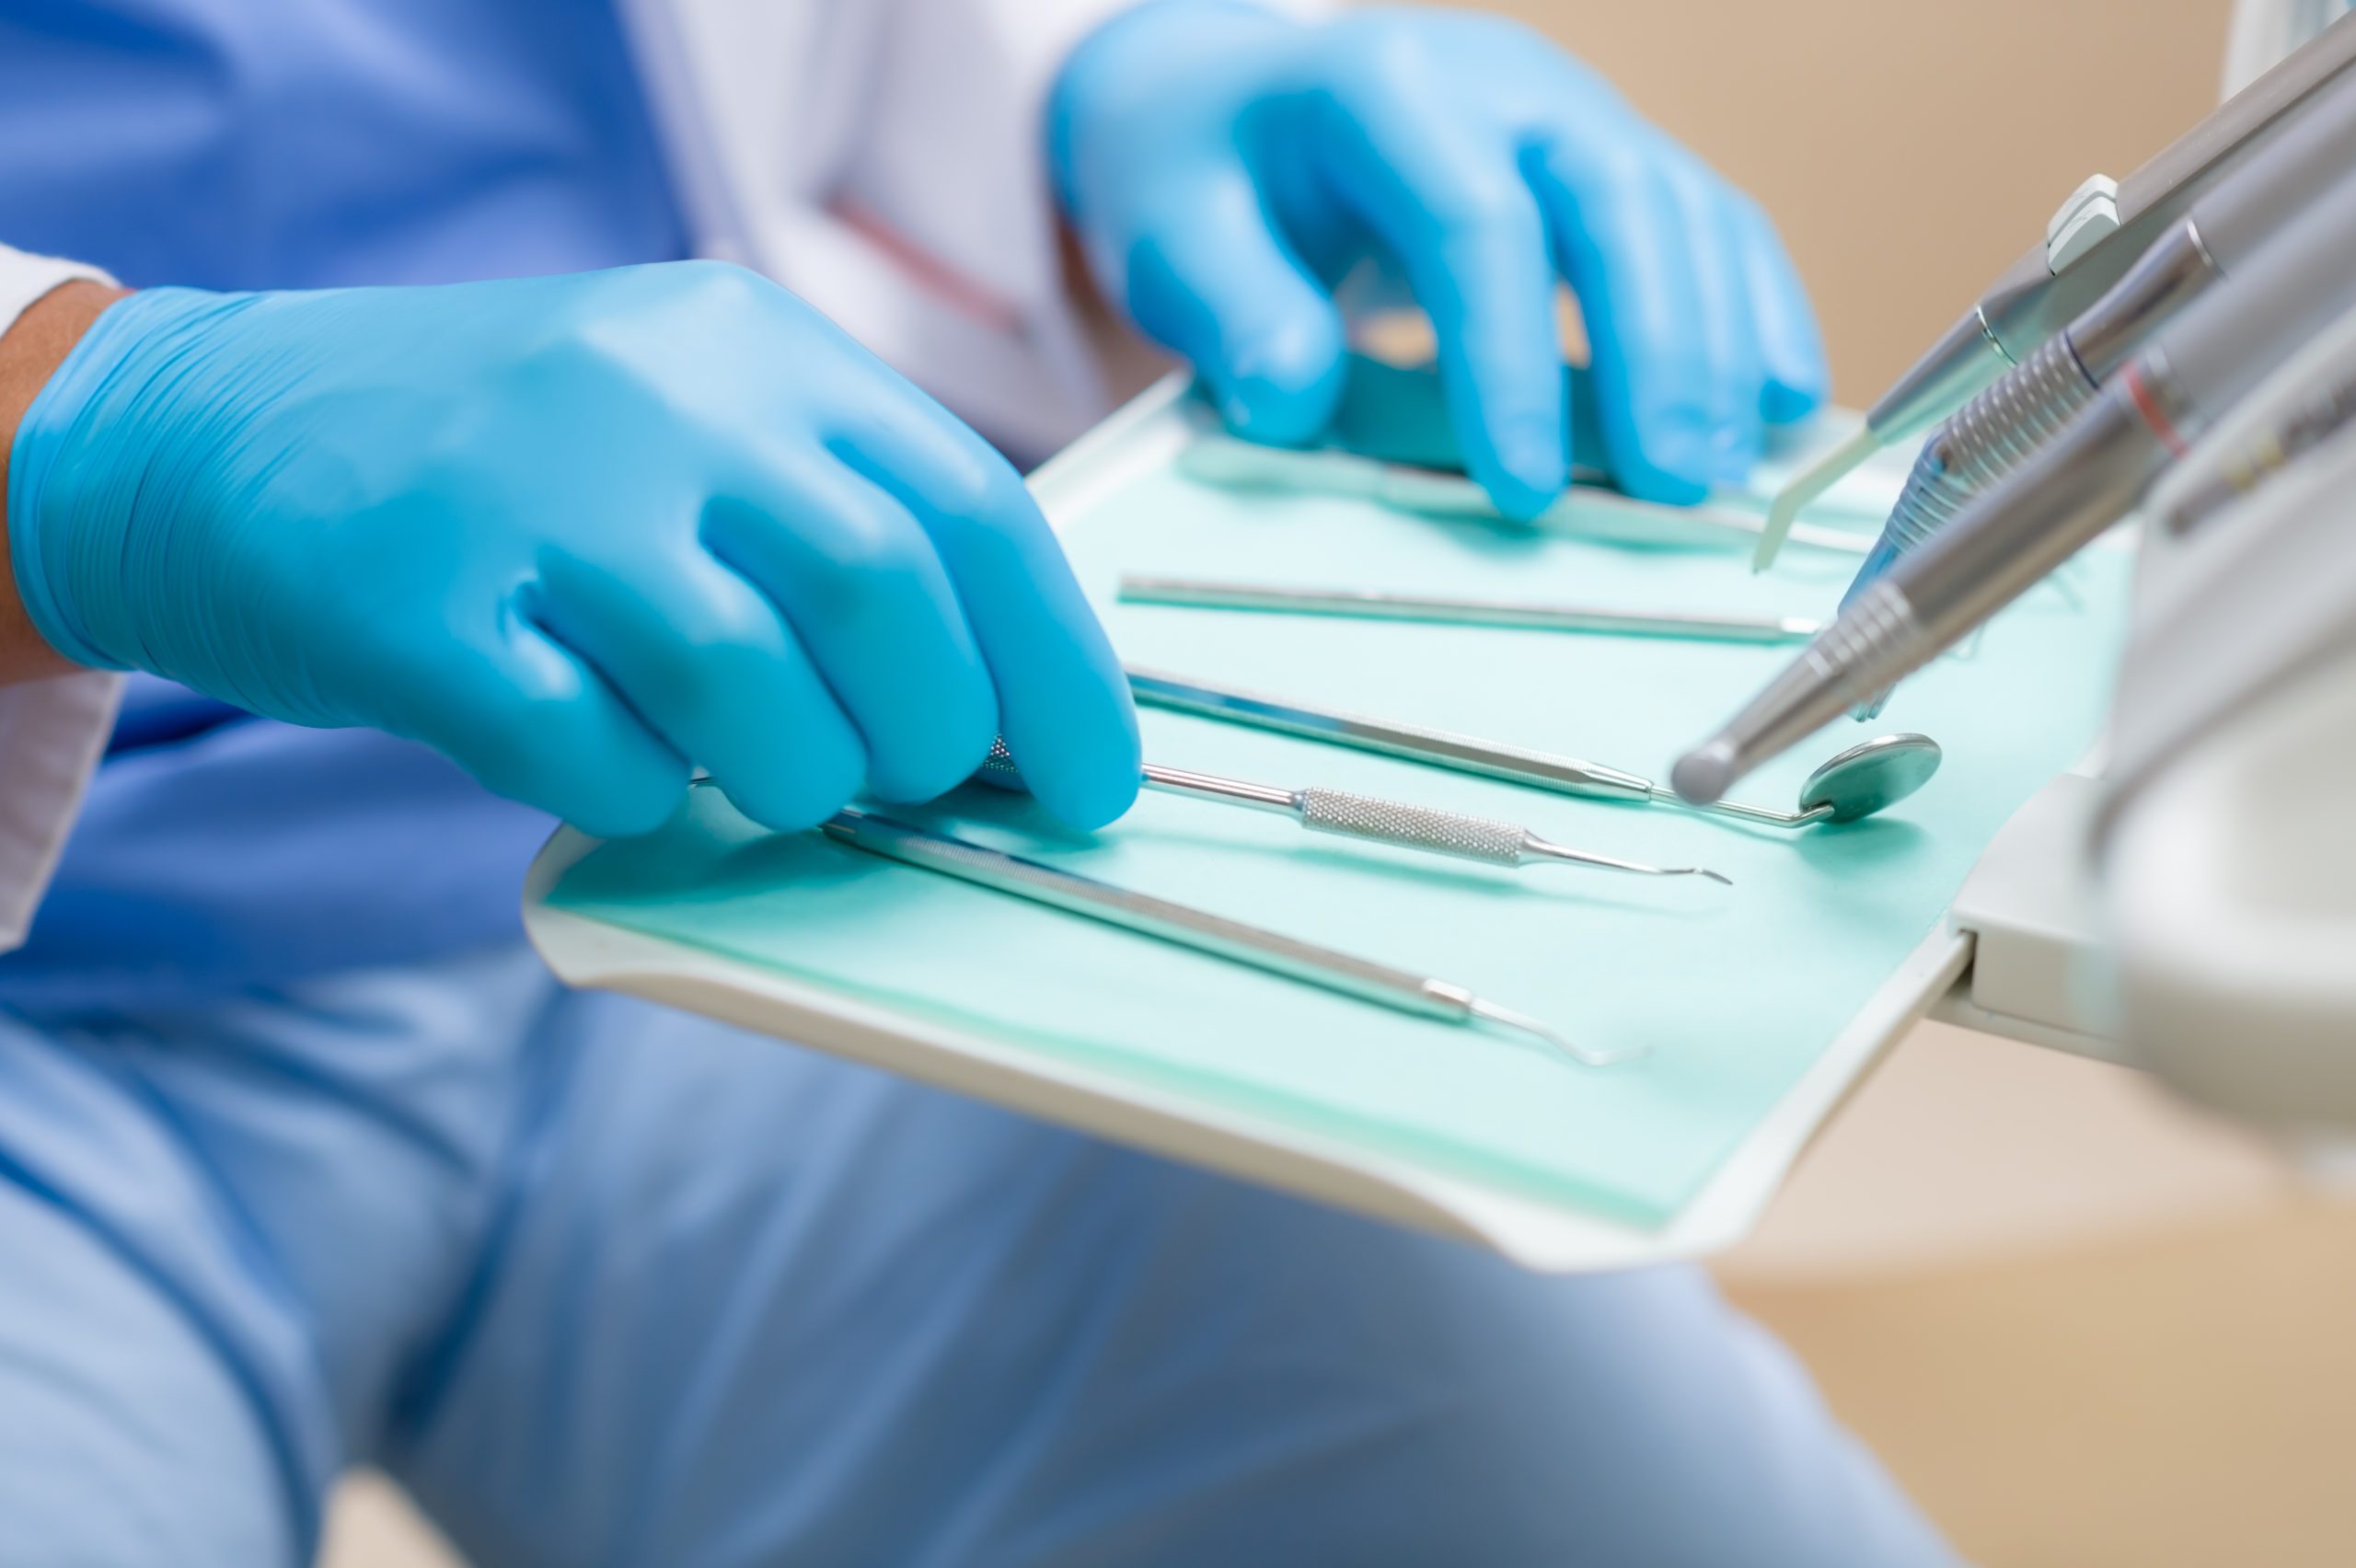 4 Excellent Reasons to See an Orthodontist - Dental equipment close up on surgery table